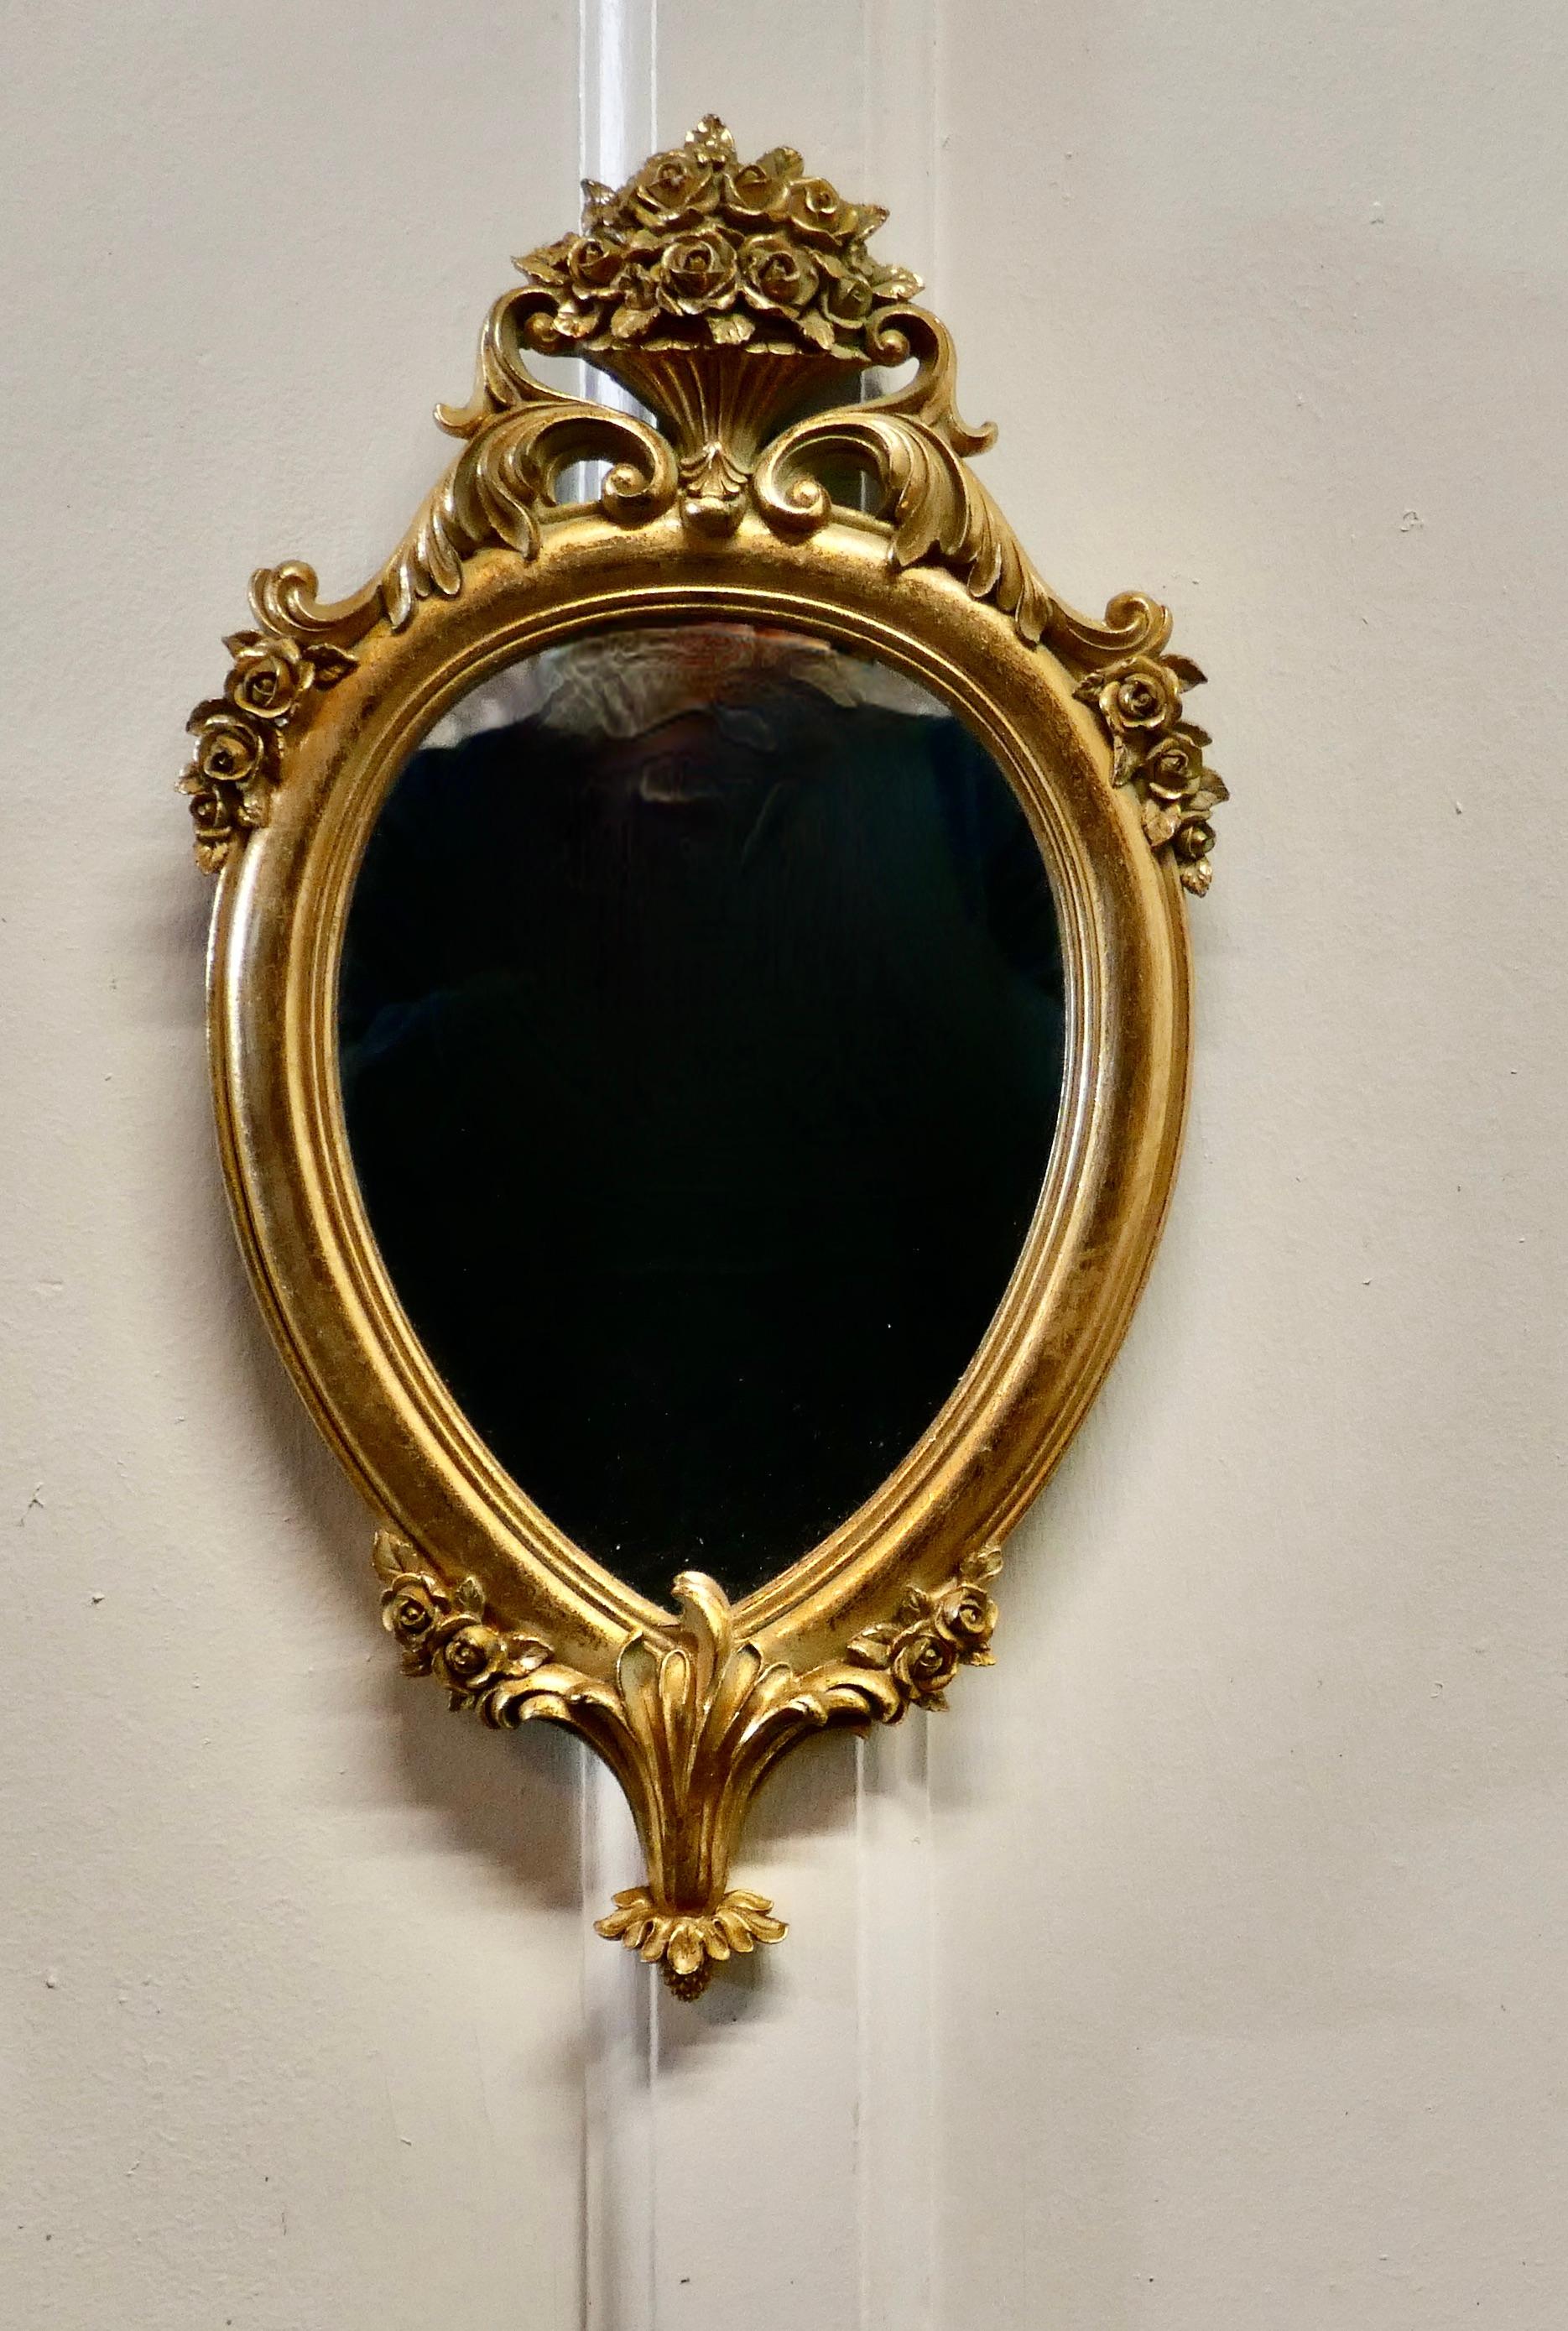 Small rococo gilt wall mirror

The mirror has an exquisite gilt frame in the rococo style, it has a teardrop shape and decorated with a vase of roses at the top more flower at the bottom
The mirror is 10” wide and 17” tall
NV220.